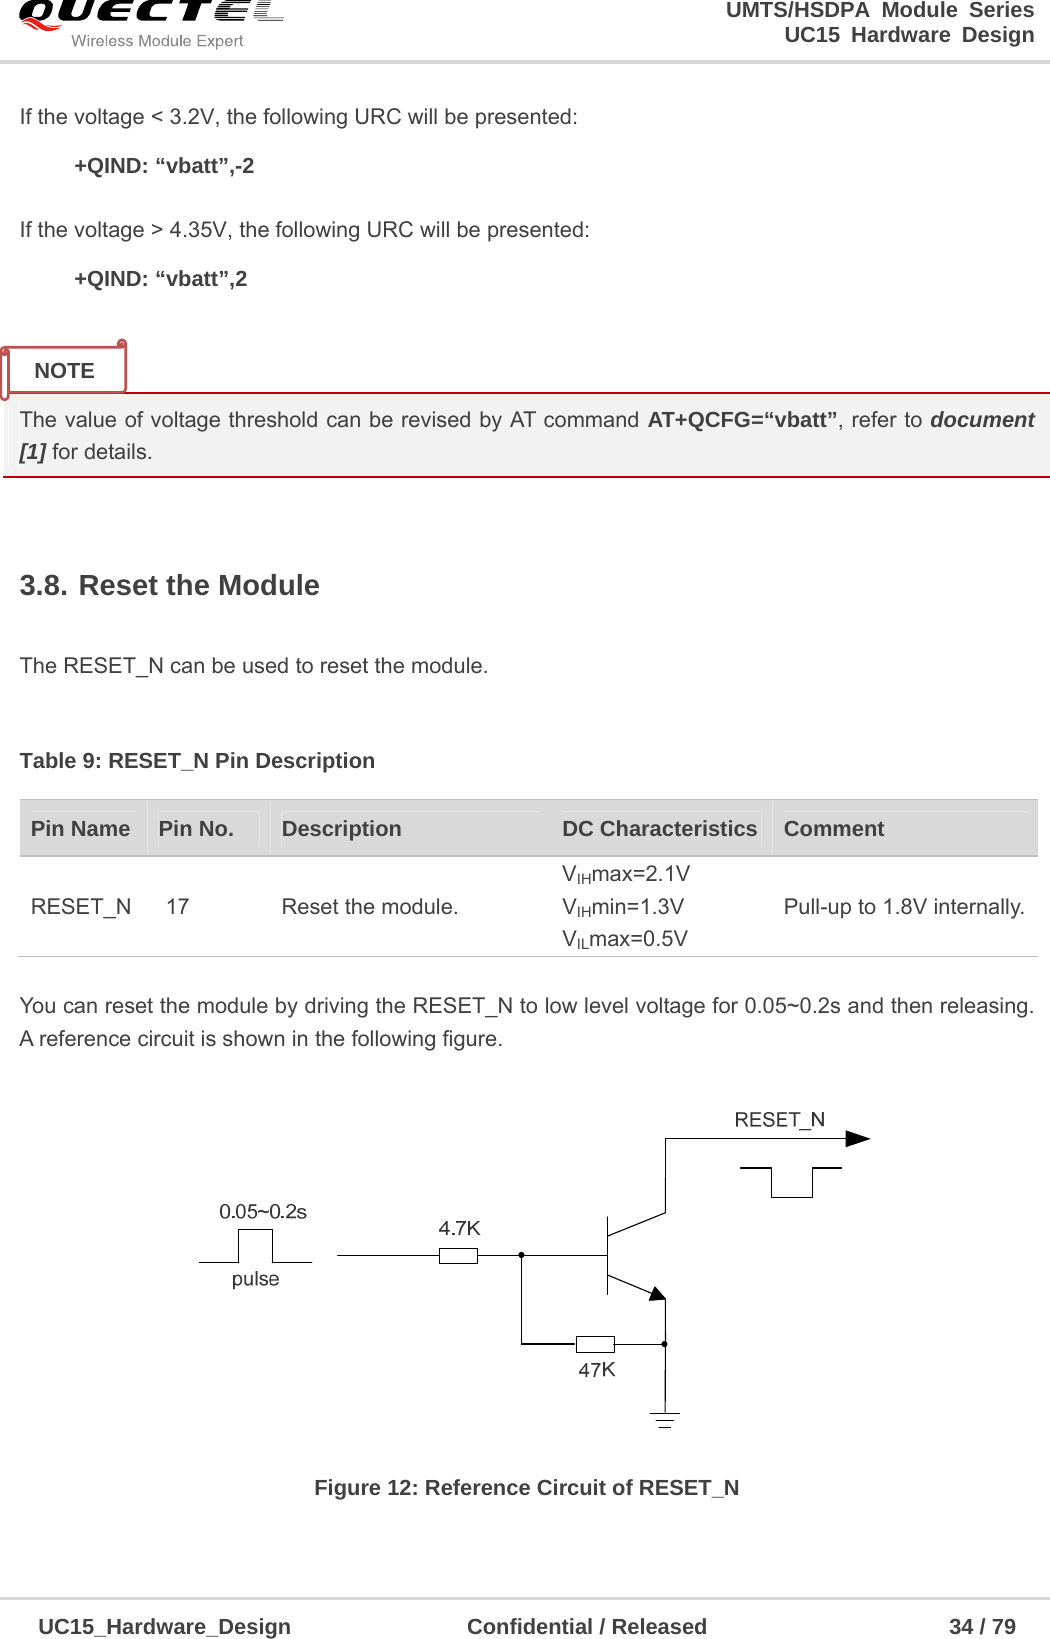                                                                        UMTS/HSDPA Module Series                                                                 UC15 Hardware Design  UC15_Hardware_Design                Confidential / Released                      34 / 79    If the voltage &lt; 3.2V, the following URC will be presented:   +QIND: “vbatt”,-2  If the voltage &gt; 4.35V, the following URC will be presented:   +QIND: “vbatt”,2   The value of voltage threshold can be revised by AT command AT+QCFG=“vbatt”, refer to document [1] for details.  3.8. Reset the Module  The RESET_N can be used to reset the module.  Table 9: RESET_N Pin Description  You can reset the module by driving the RESET_N to low level voltage for 0.05~0.2s and then releasing. A reference circuit is shown in the following figure.  Figure 12: Reference Circuit of RESET_N    Pin Name    Pin No.  Description  DC Characteristics  Comment RESET_N  17  Reset the module. VIHmax=2.1V VIHmin=1.3V VILmax=0.5V Pull-up to 1.8V internally. NOTE 